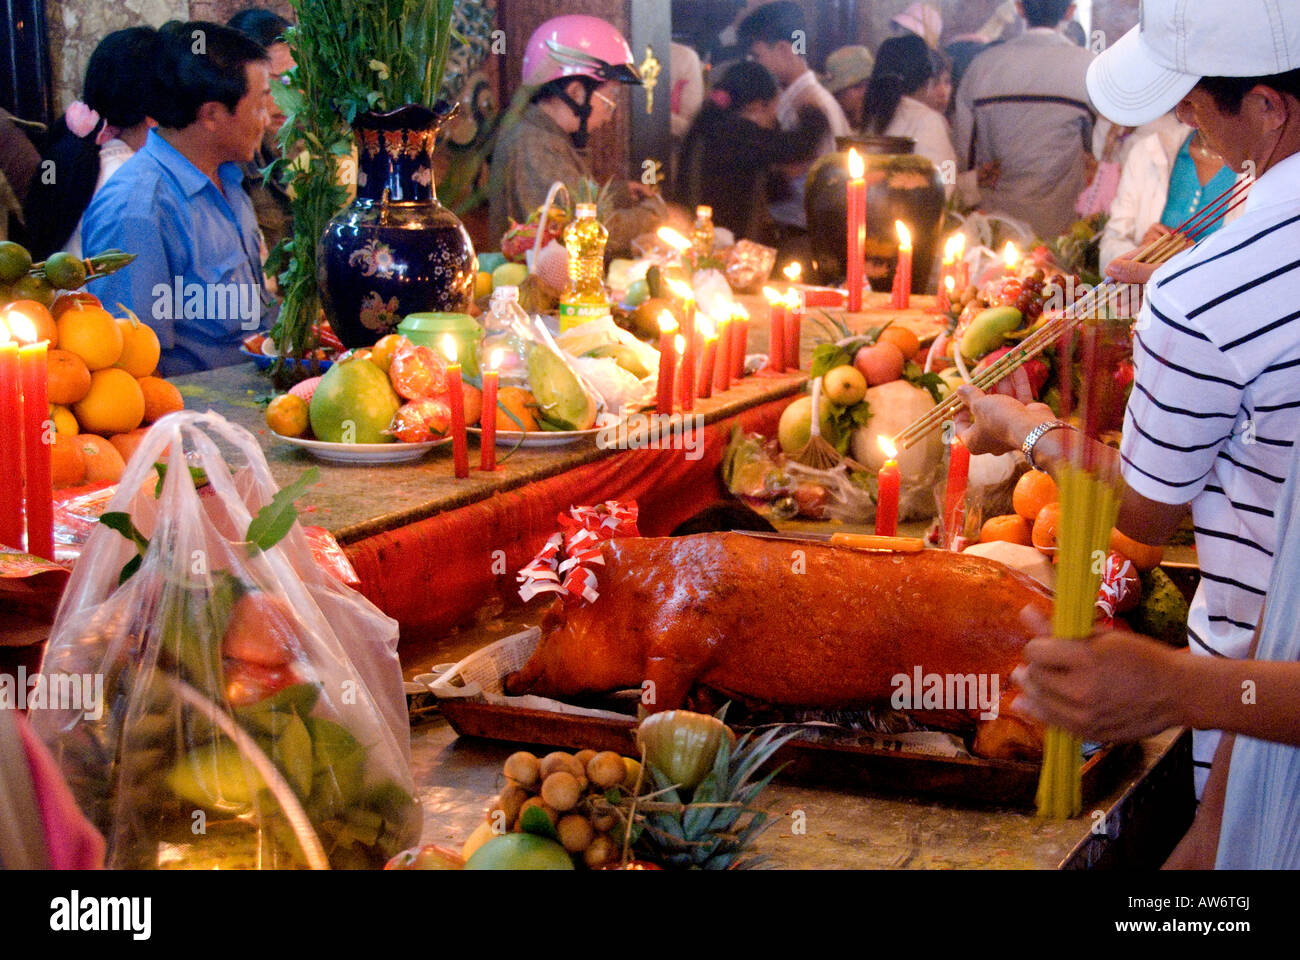 A pilgrim offers a roasted pig in the Temple of Lady Xu, Nui Sam during Tet, hoping for Good Luck and Prosperity in the New Year Stock Photo